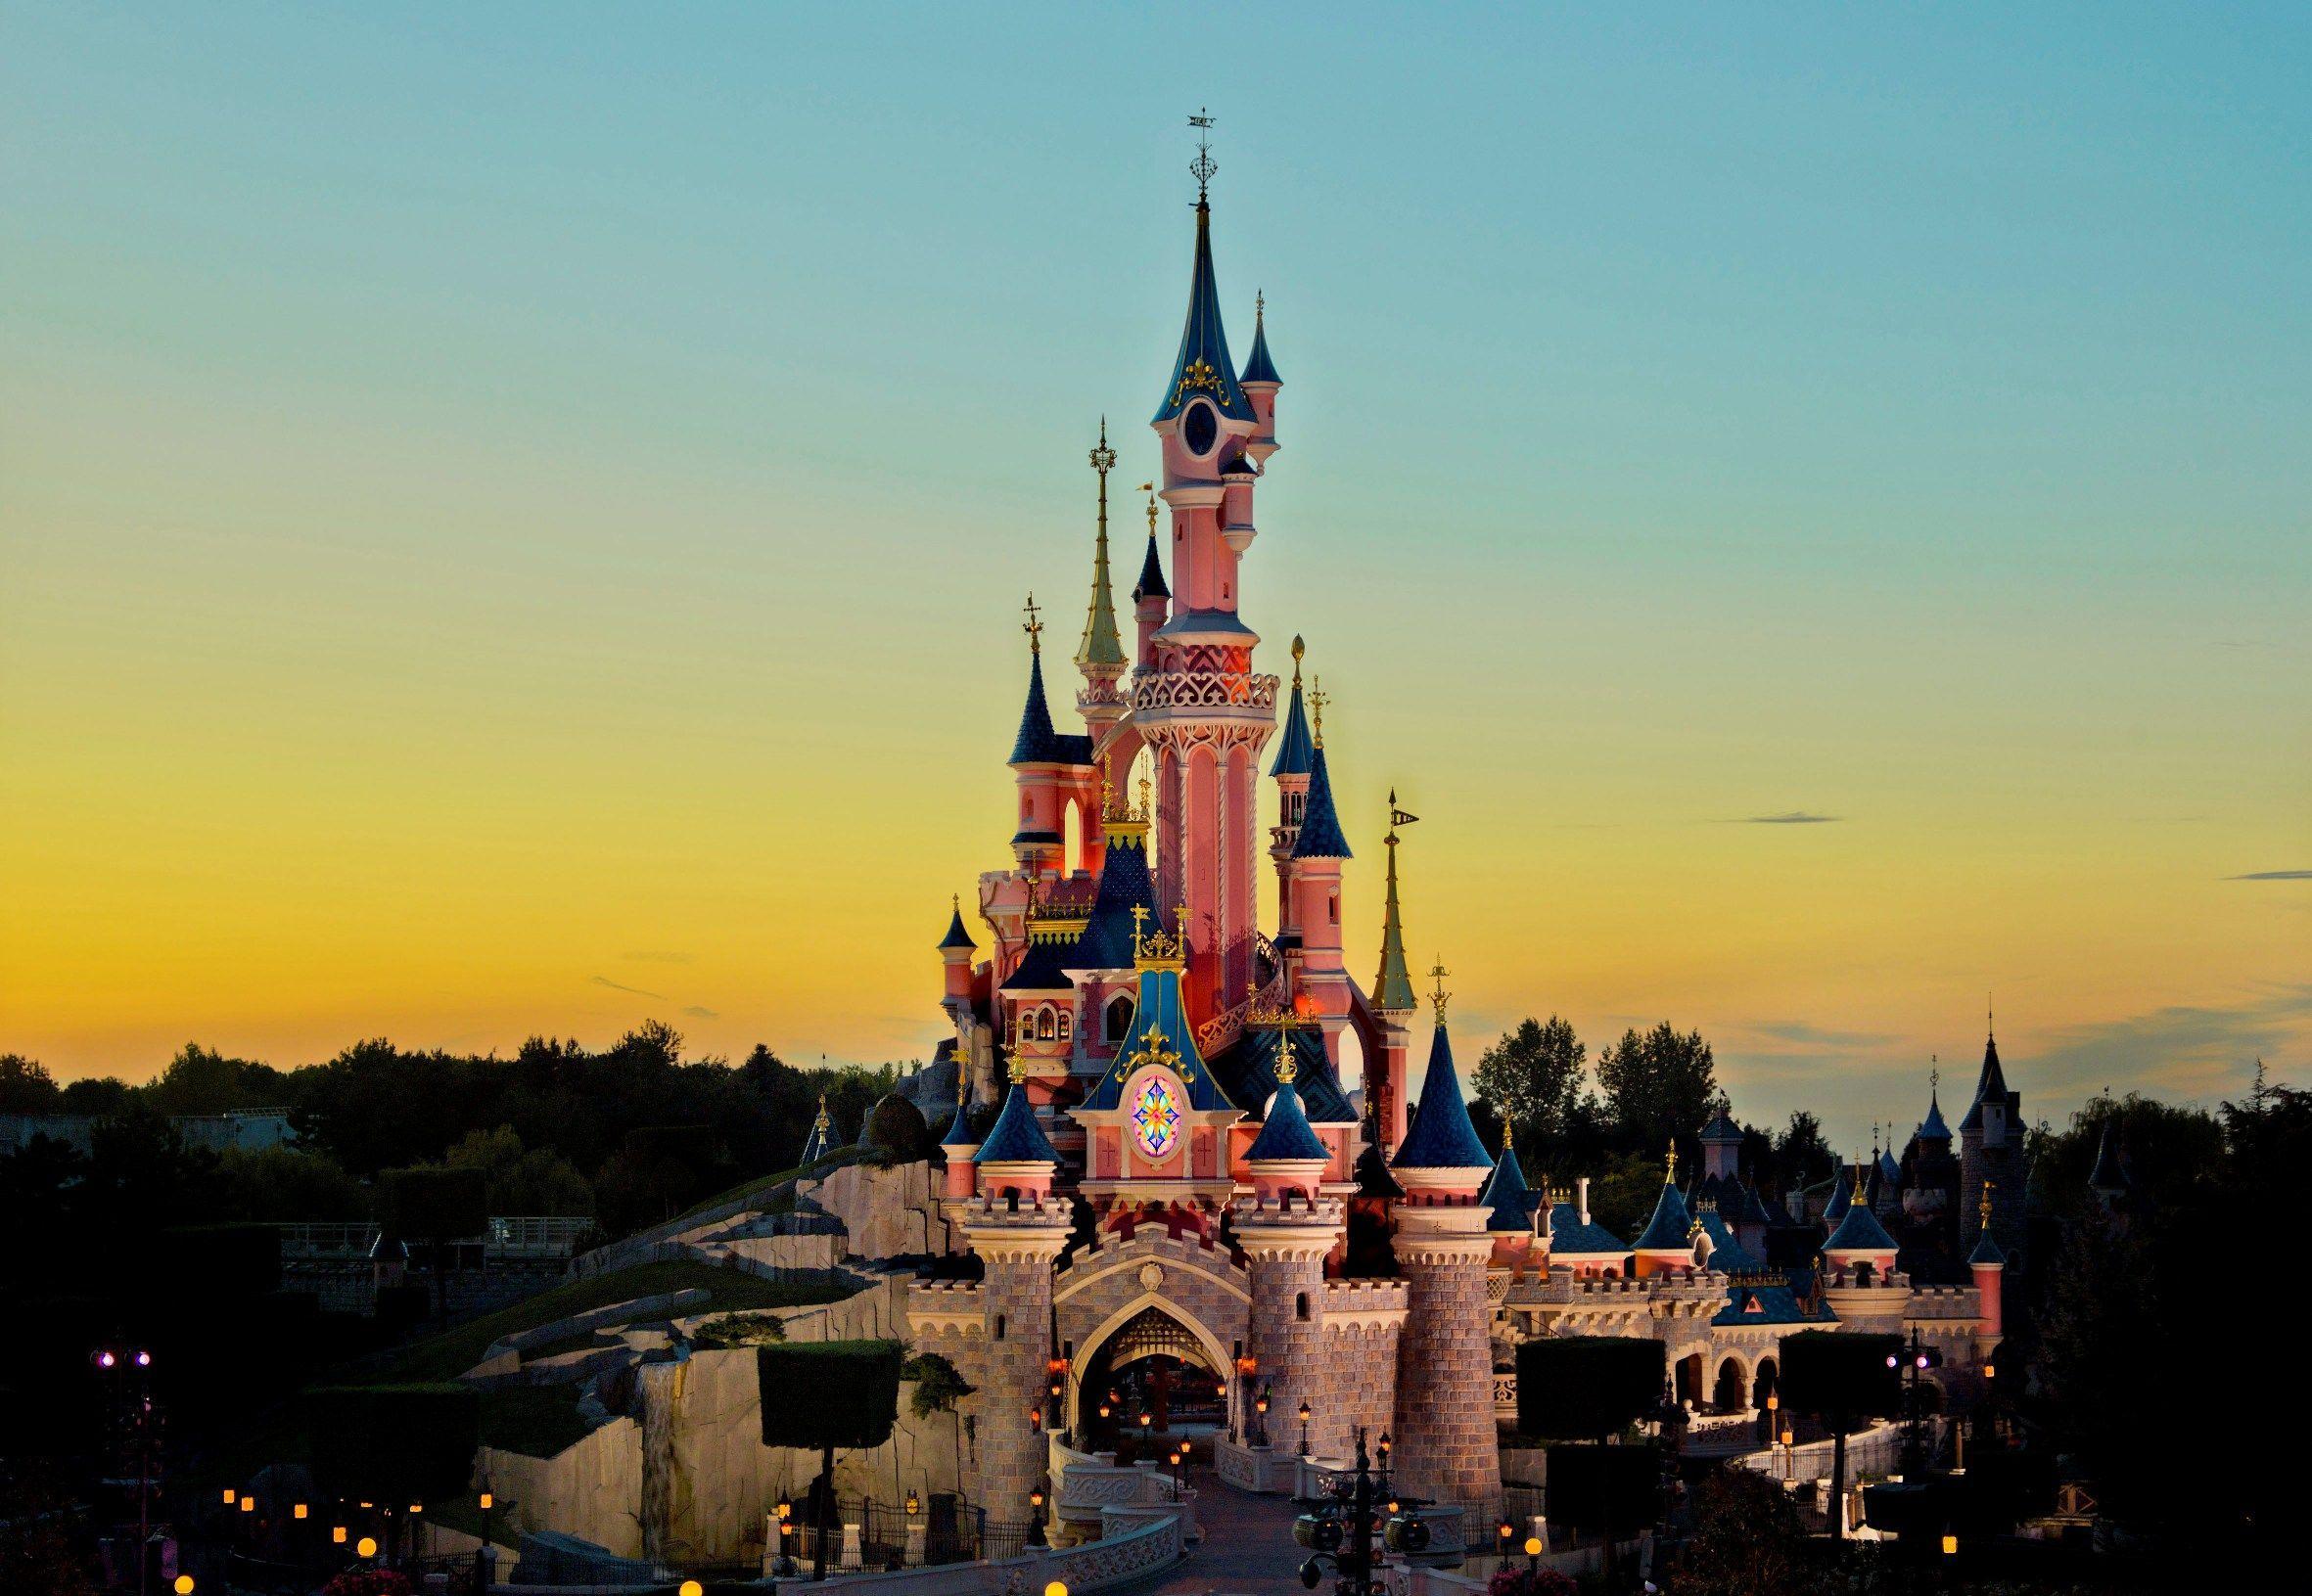 The Sleeping Beauty Castle at Disneyland Paris is lit up at night with a blue and pink glow. - Disneyland